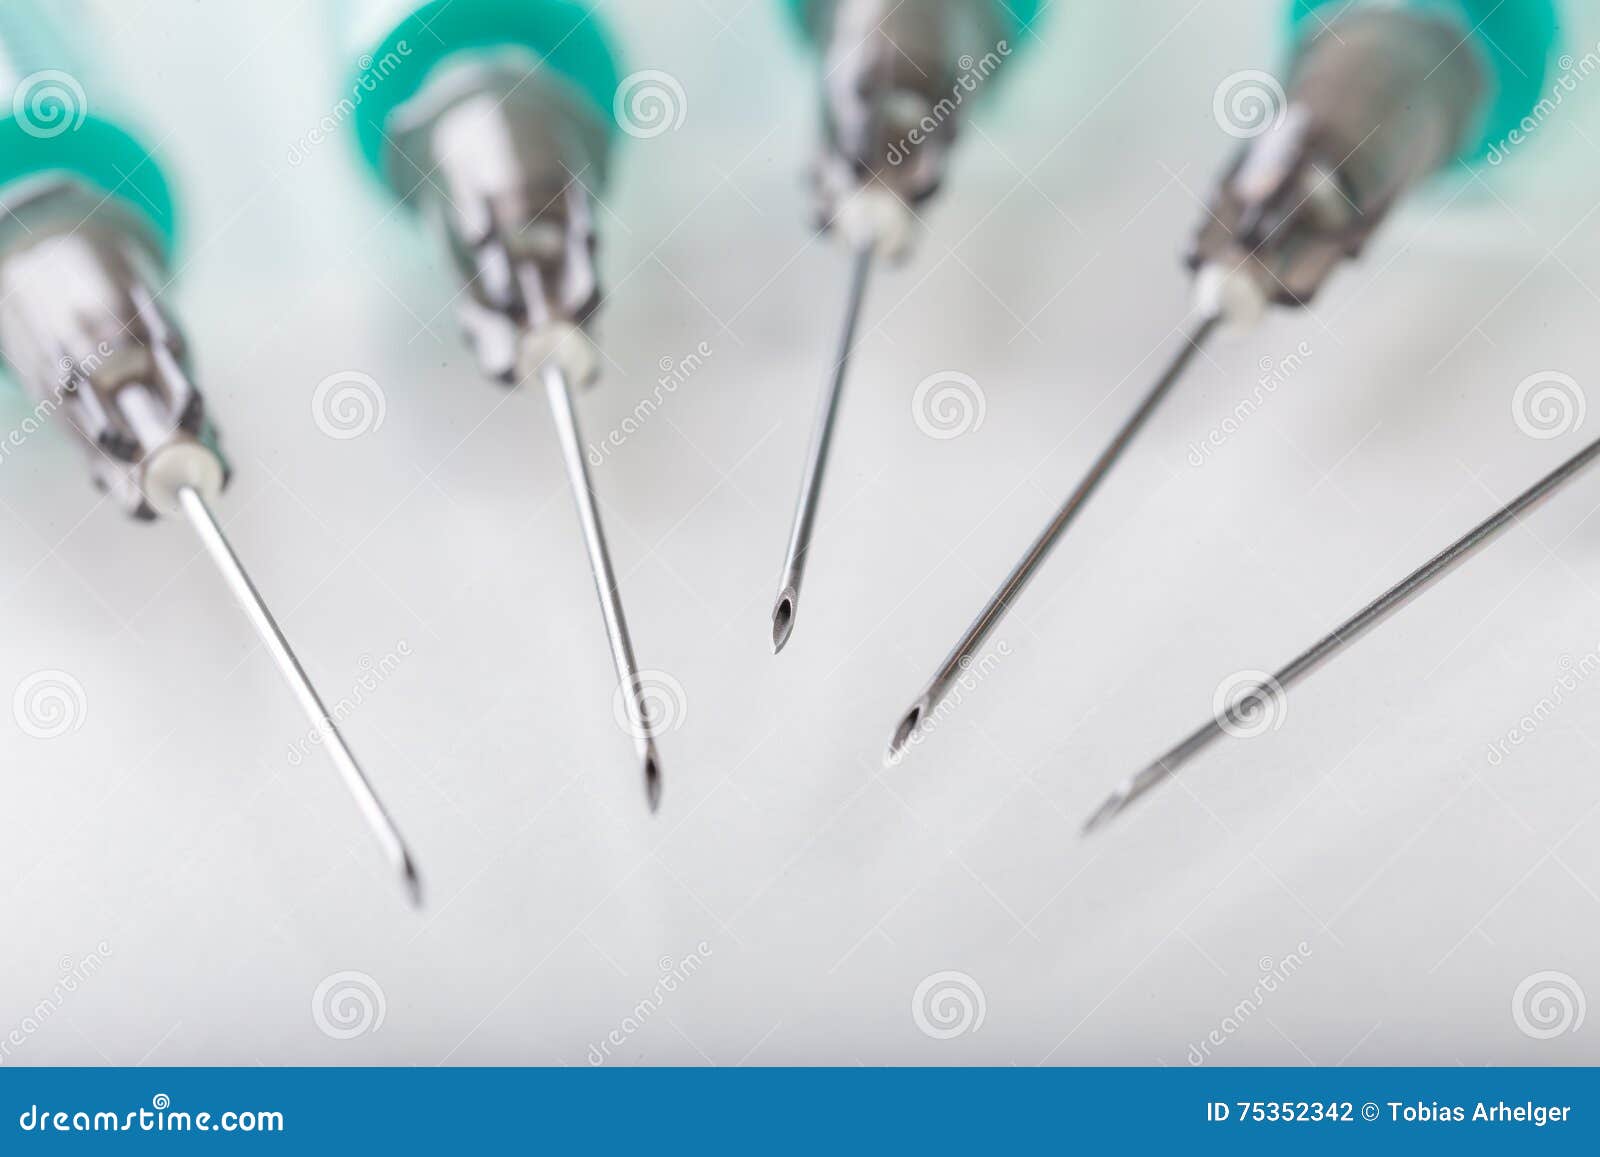 medical injection needles on syrenges